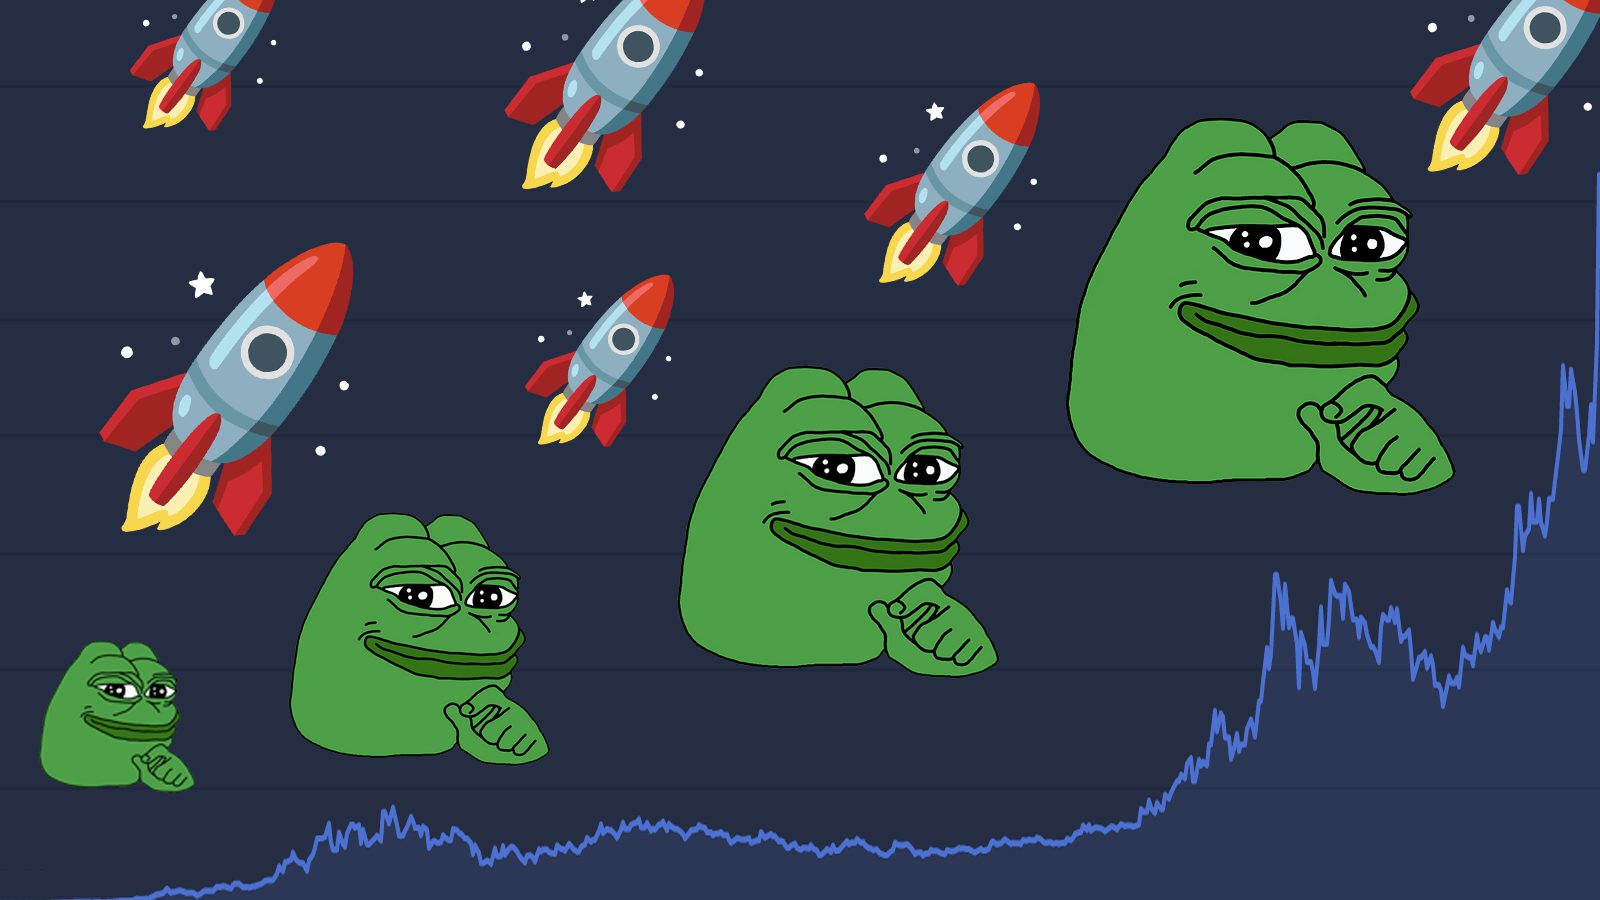 Pepe Passes Solana & DOGE in Daily Volume Amid ATH Rally